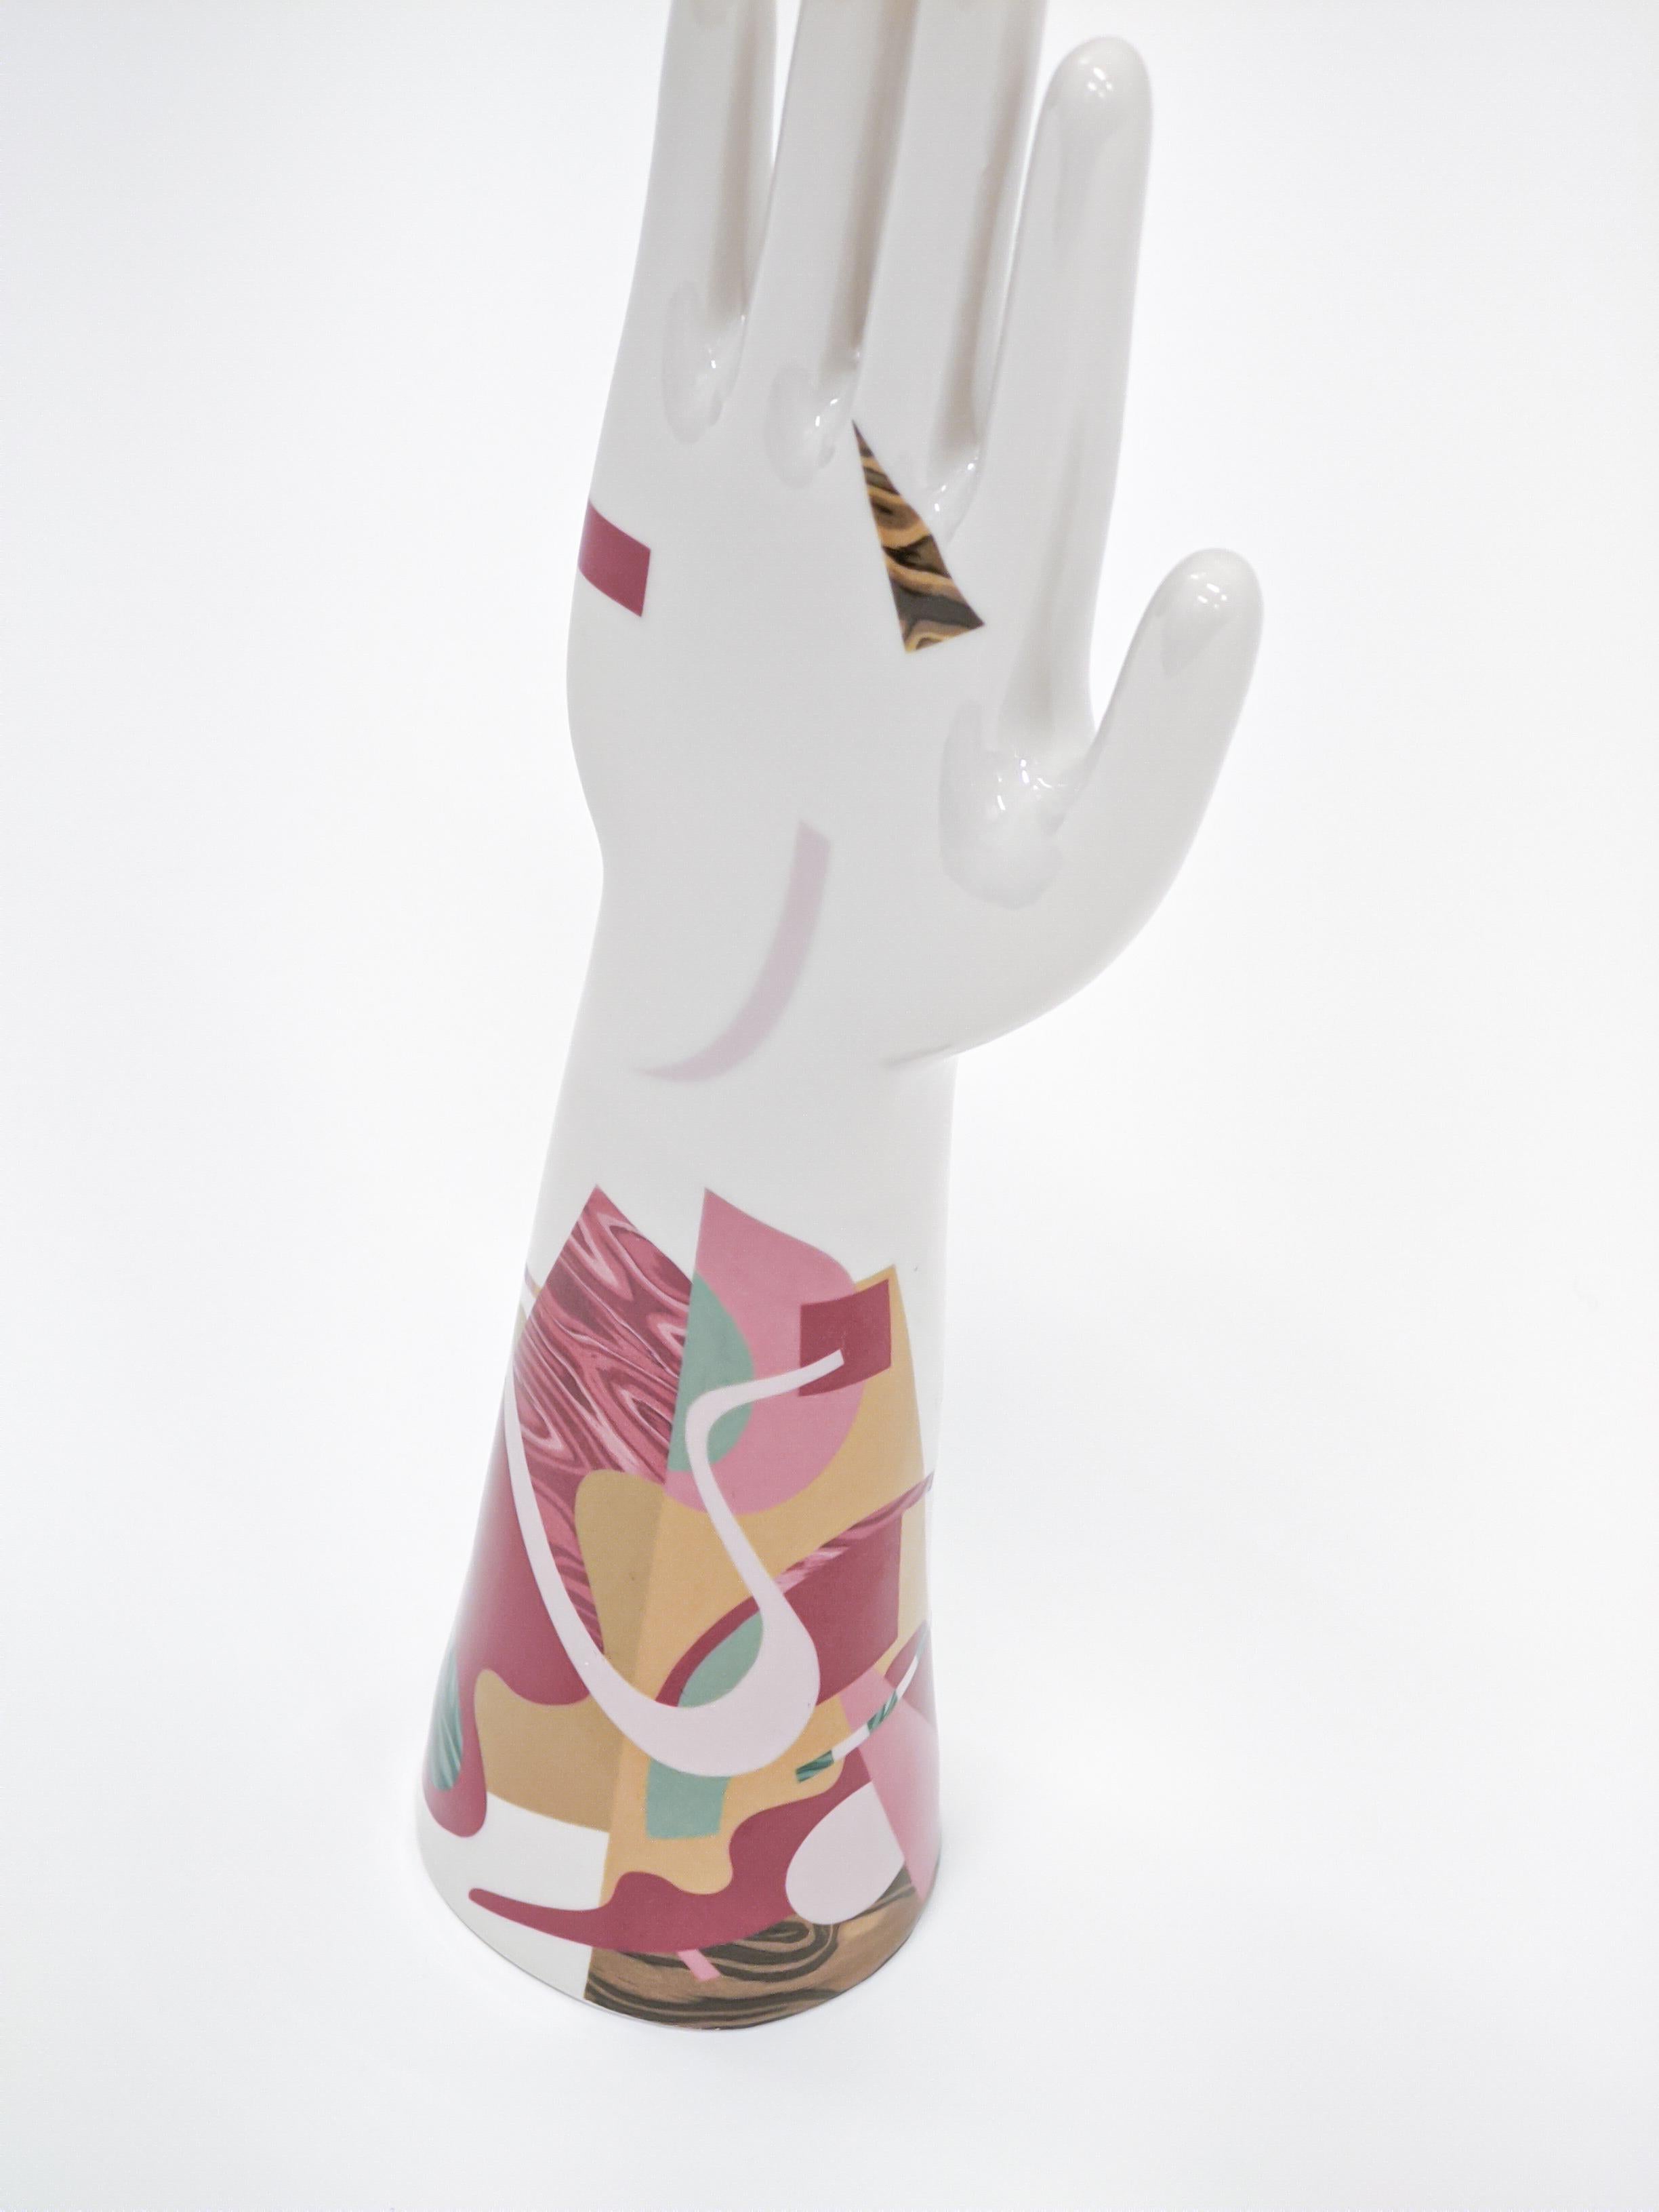 Italian Anatomica, Porcelain Hand with Alchimie Decoration by Vito Nesta For Sale